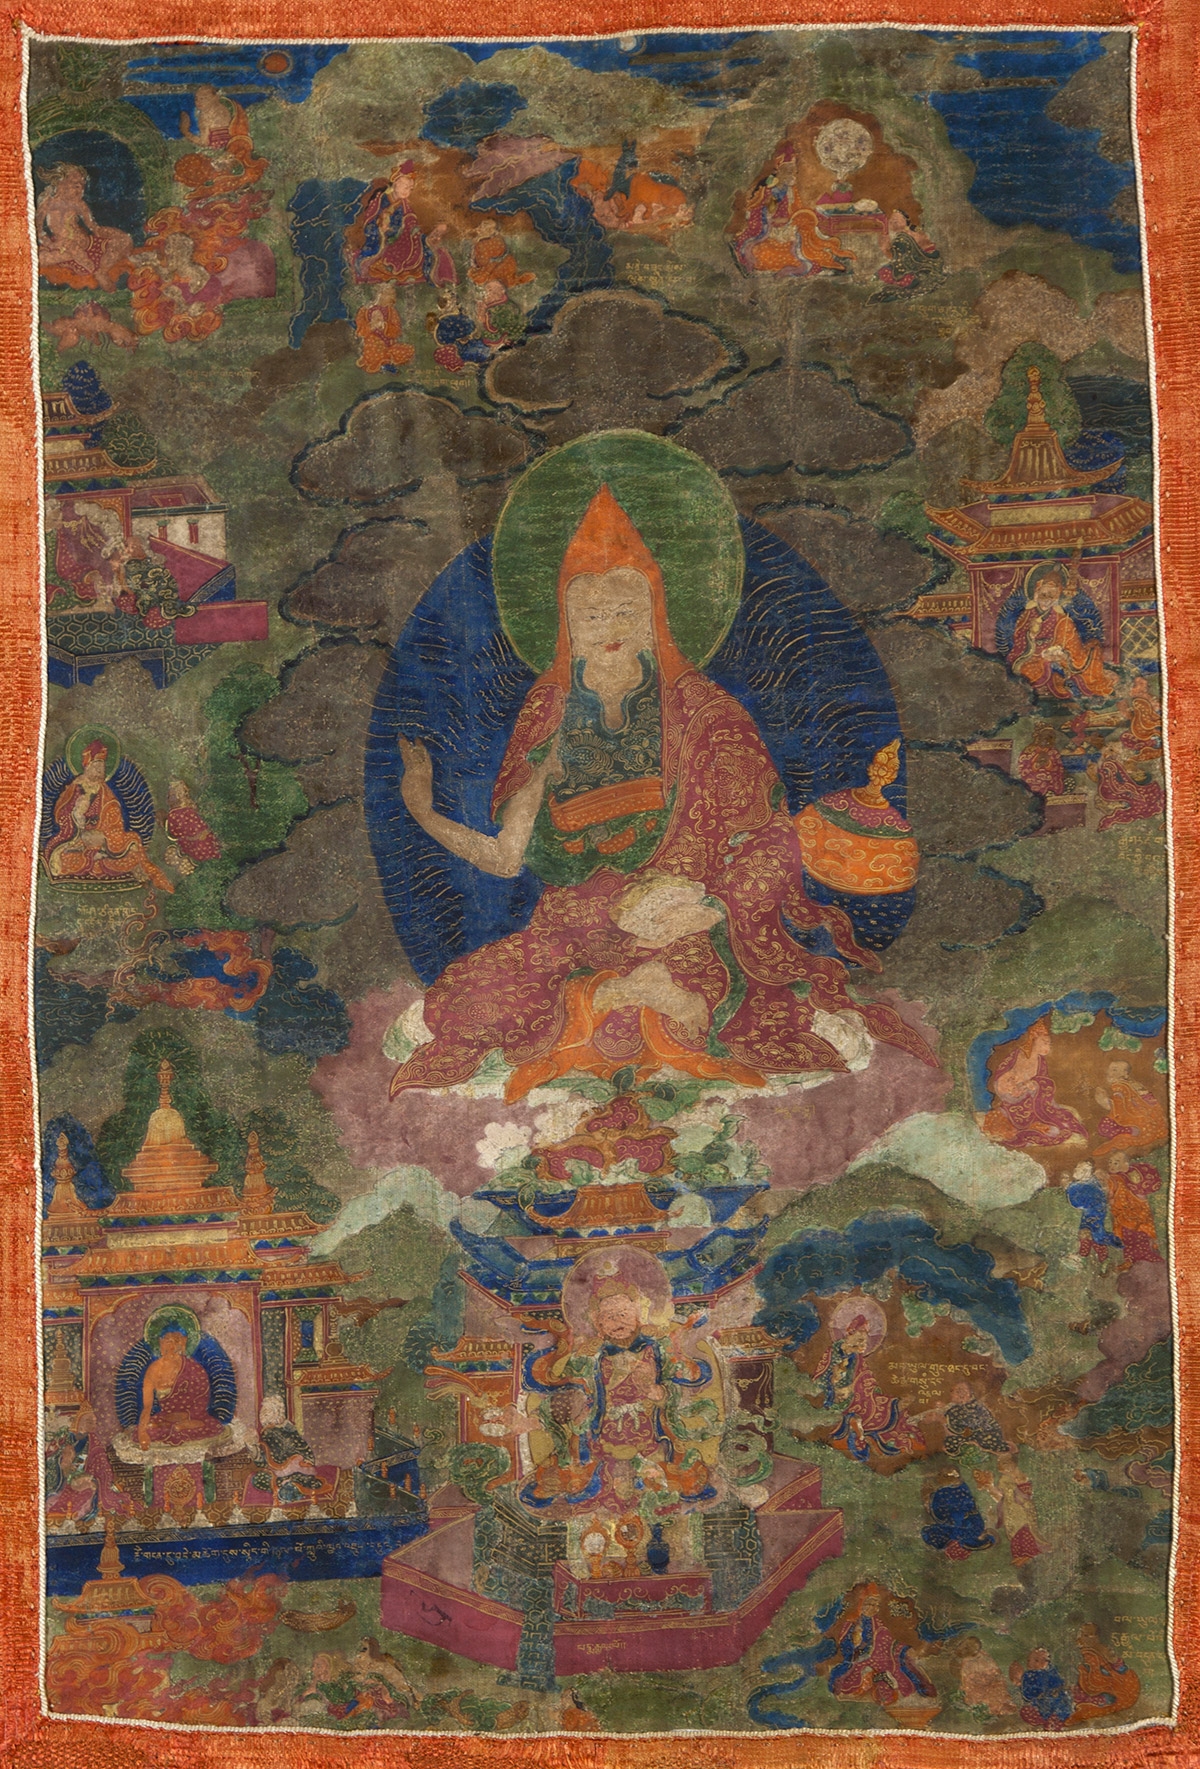 Padmasambhava and the Teaching Activities of Guru Rinpoche. 18th century. U (Central Tibet). Tradition: Nyingma. Pigments on cloth. MU-CIV/MAO "Giuseppe Tucci," inv. 917/750. Image courtesy of the Museum of Civilisation/Museum of Oriental Art "Giuseppe Tucci," Rome.